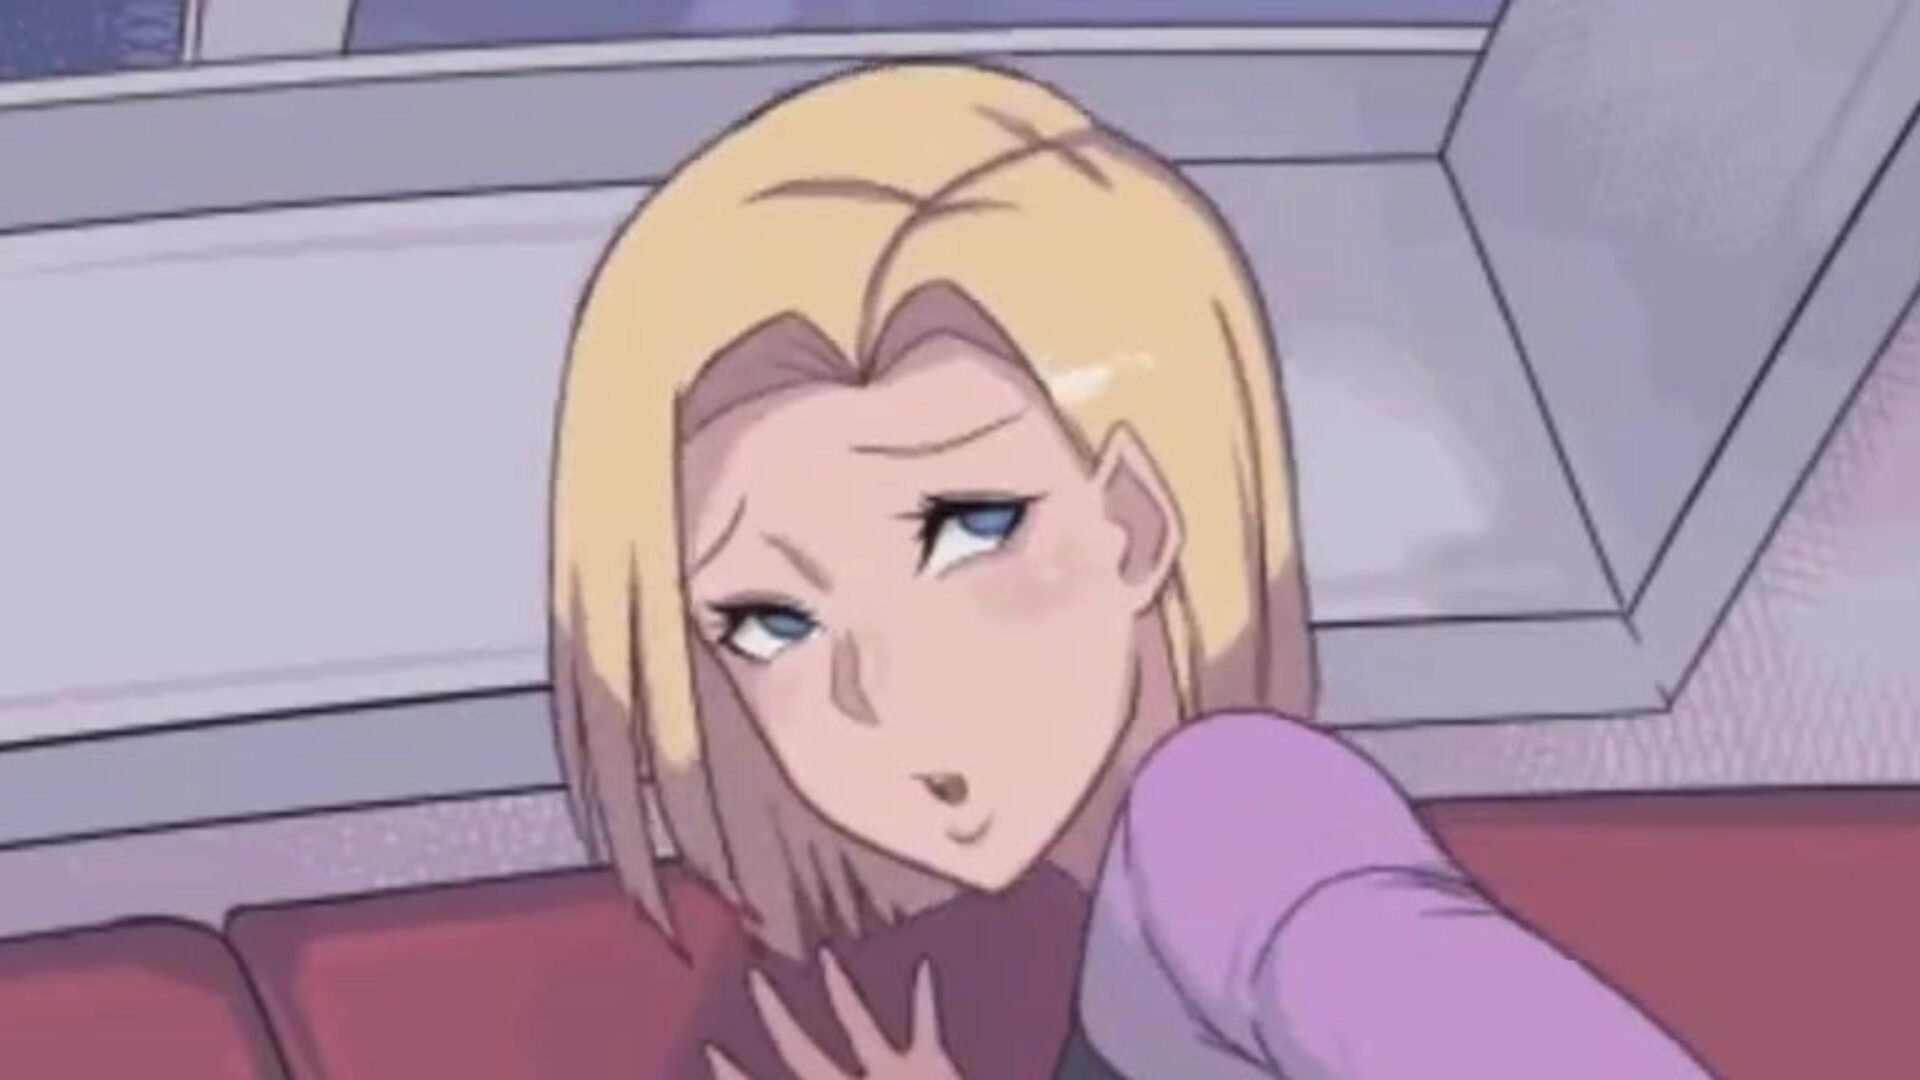 android 18 drilled